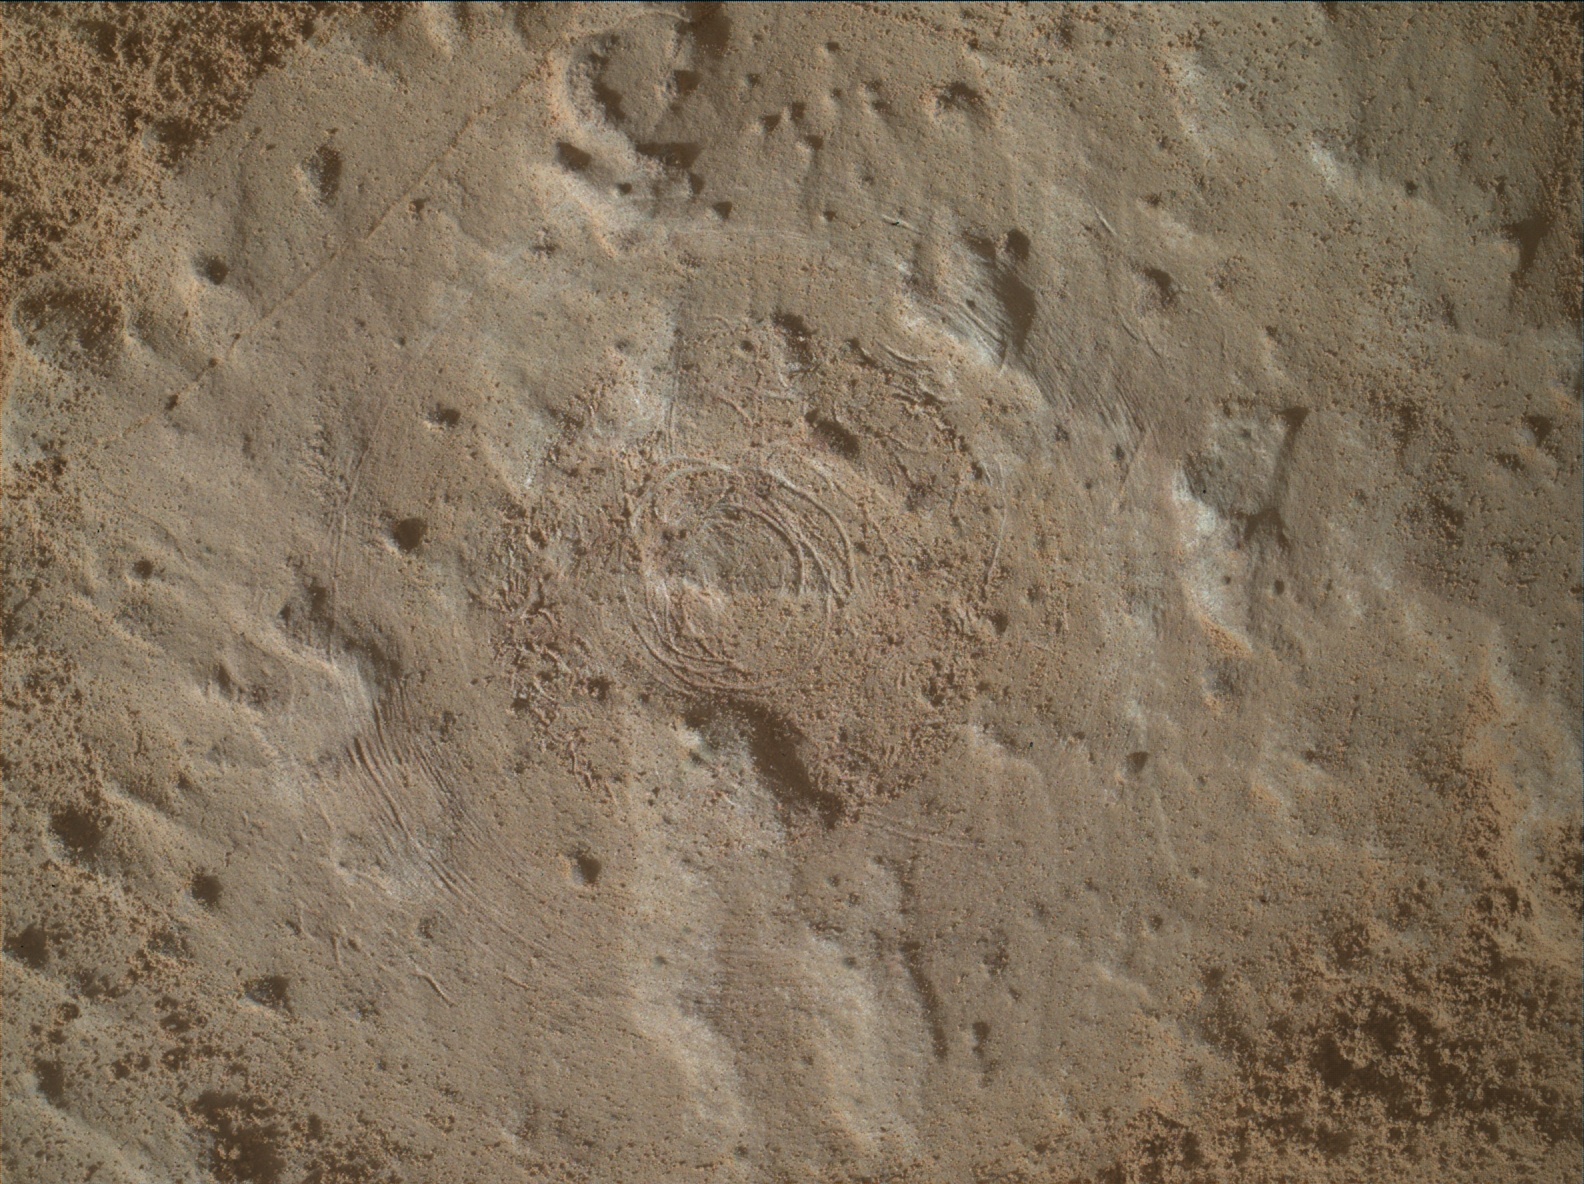 Nasa's Mars rover Curiosity acquired this image using its Mars Hand Lens Imager (MAHLI) on Sol 3086